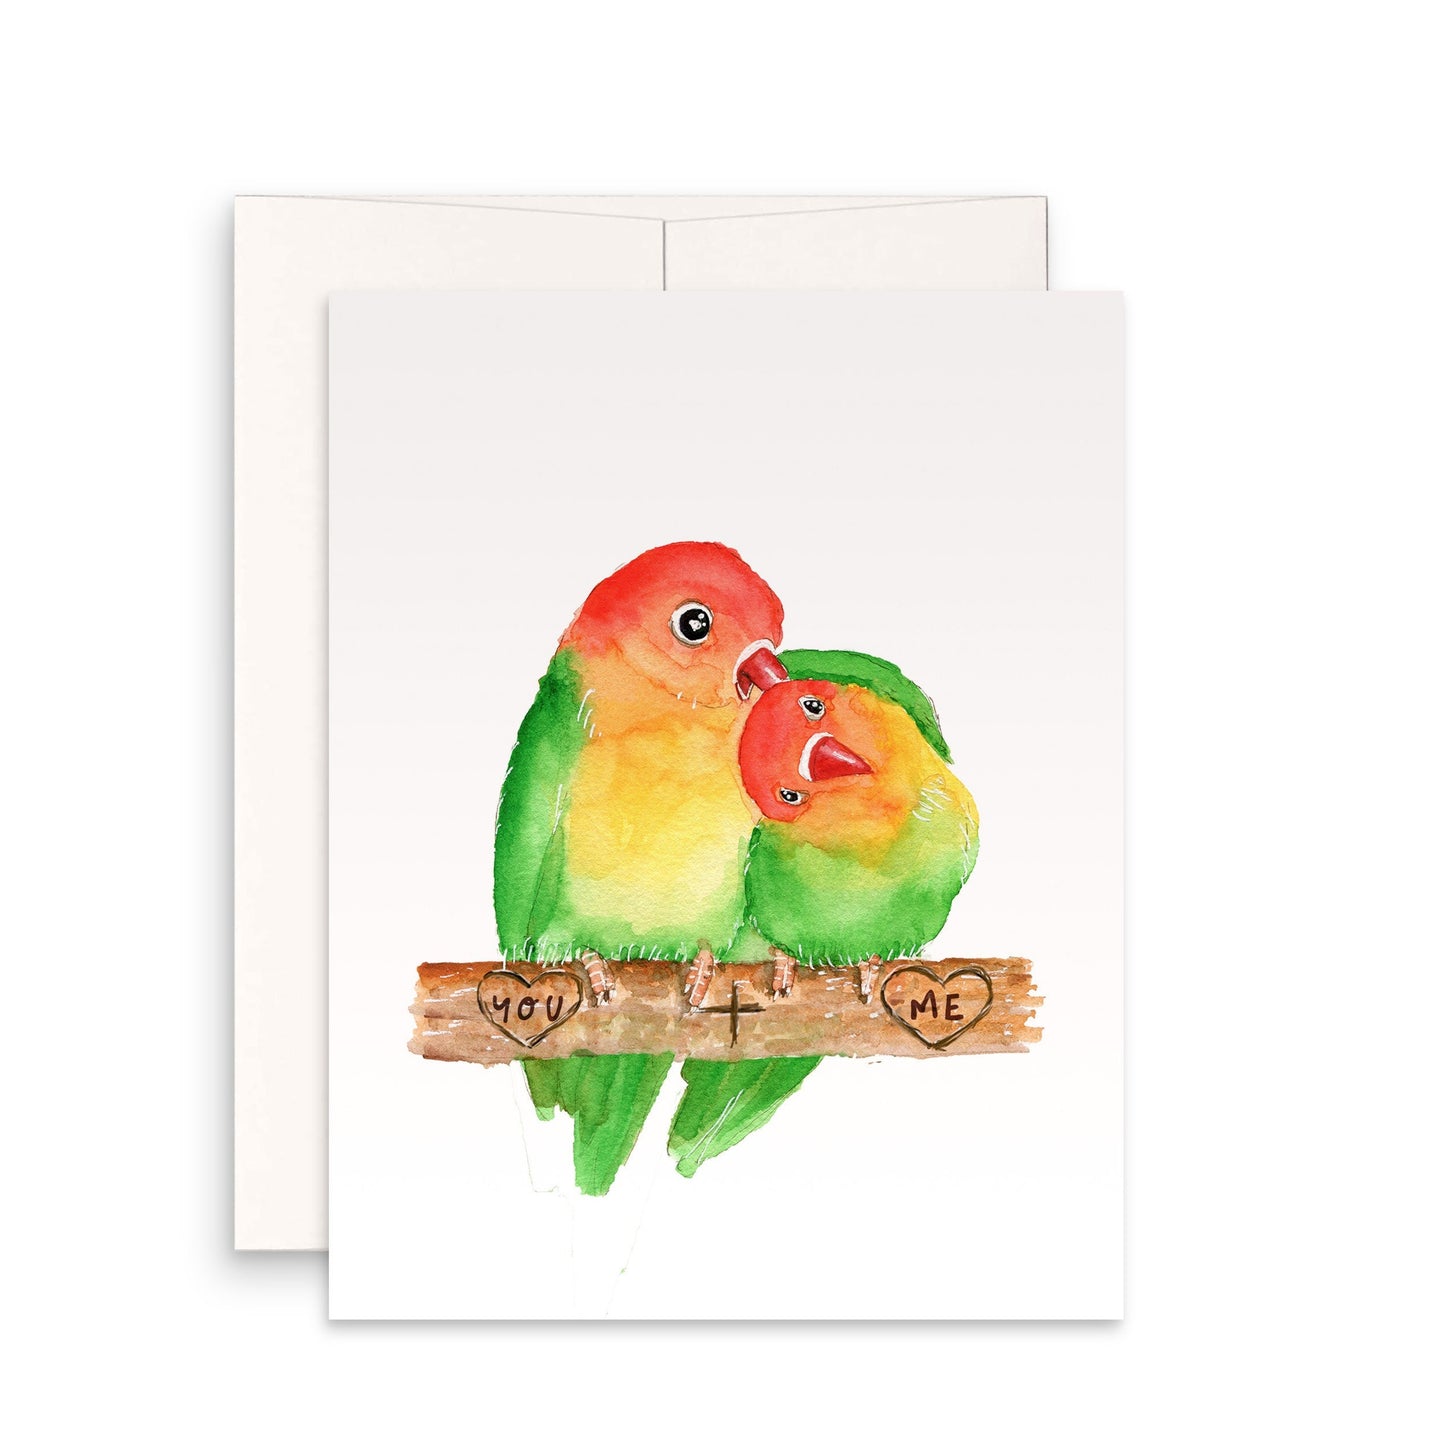 Lovebird Couple Valentine's Day Card For Wife - Cute Anniversary Card For Boyfriend - Custom Anniversary Card For Husband